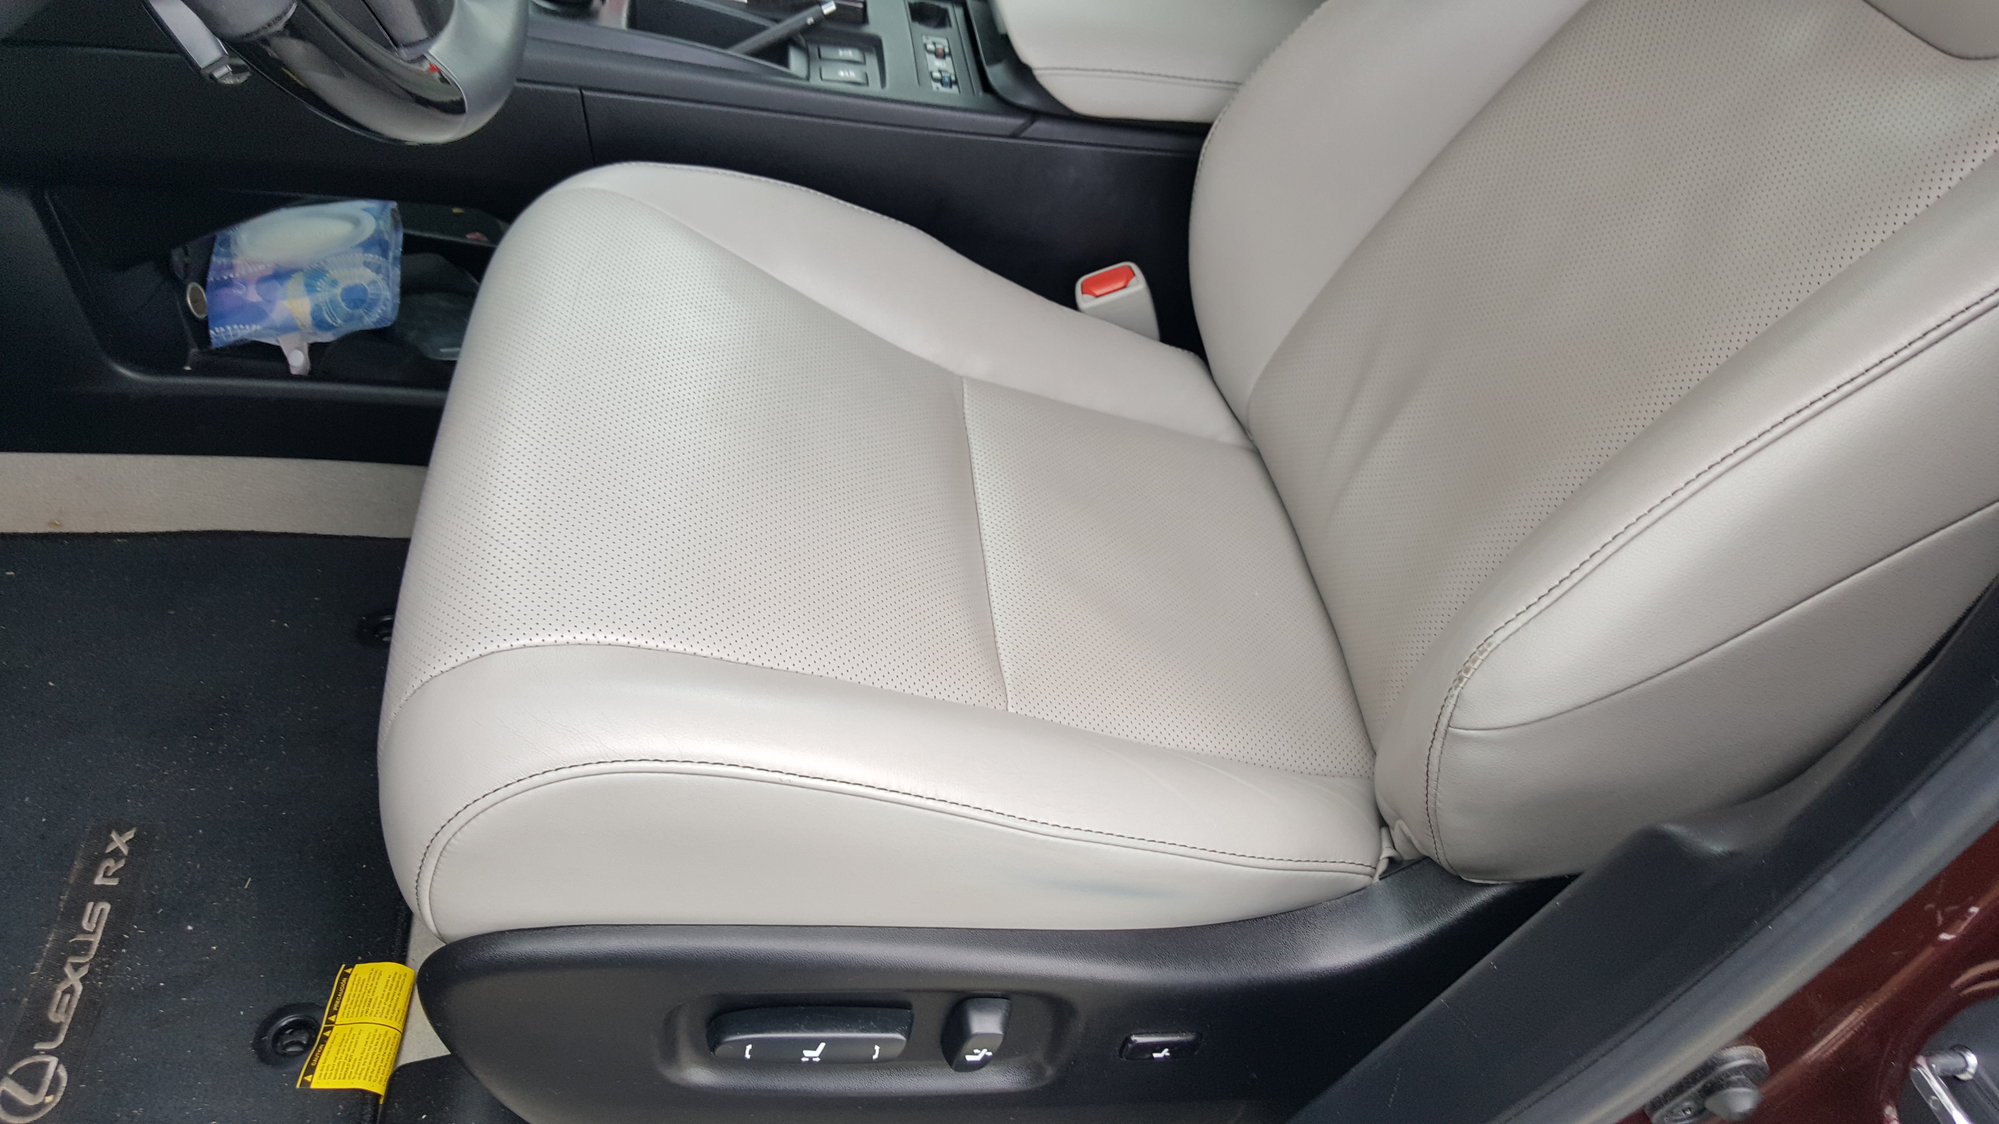 Best Leather Cleaner Conditioner For Lexus Interior Clublexus Forum Discussion - How To Clean Lexus Leather Car Seats